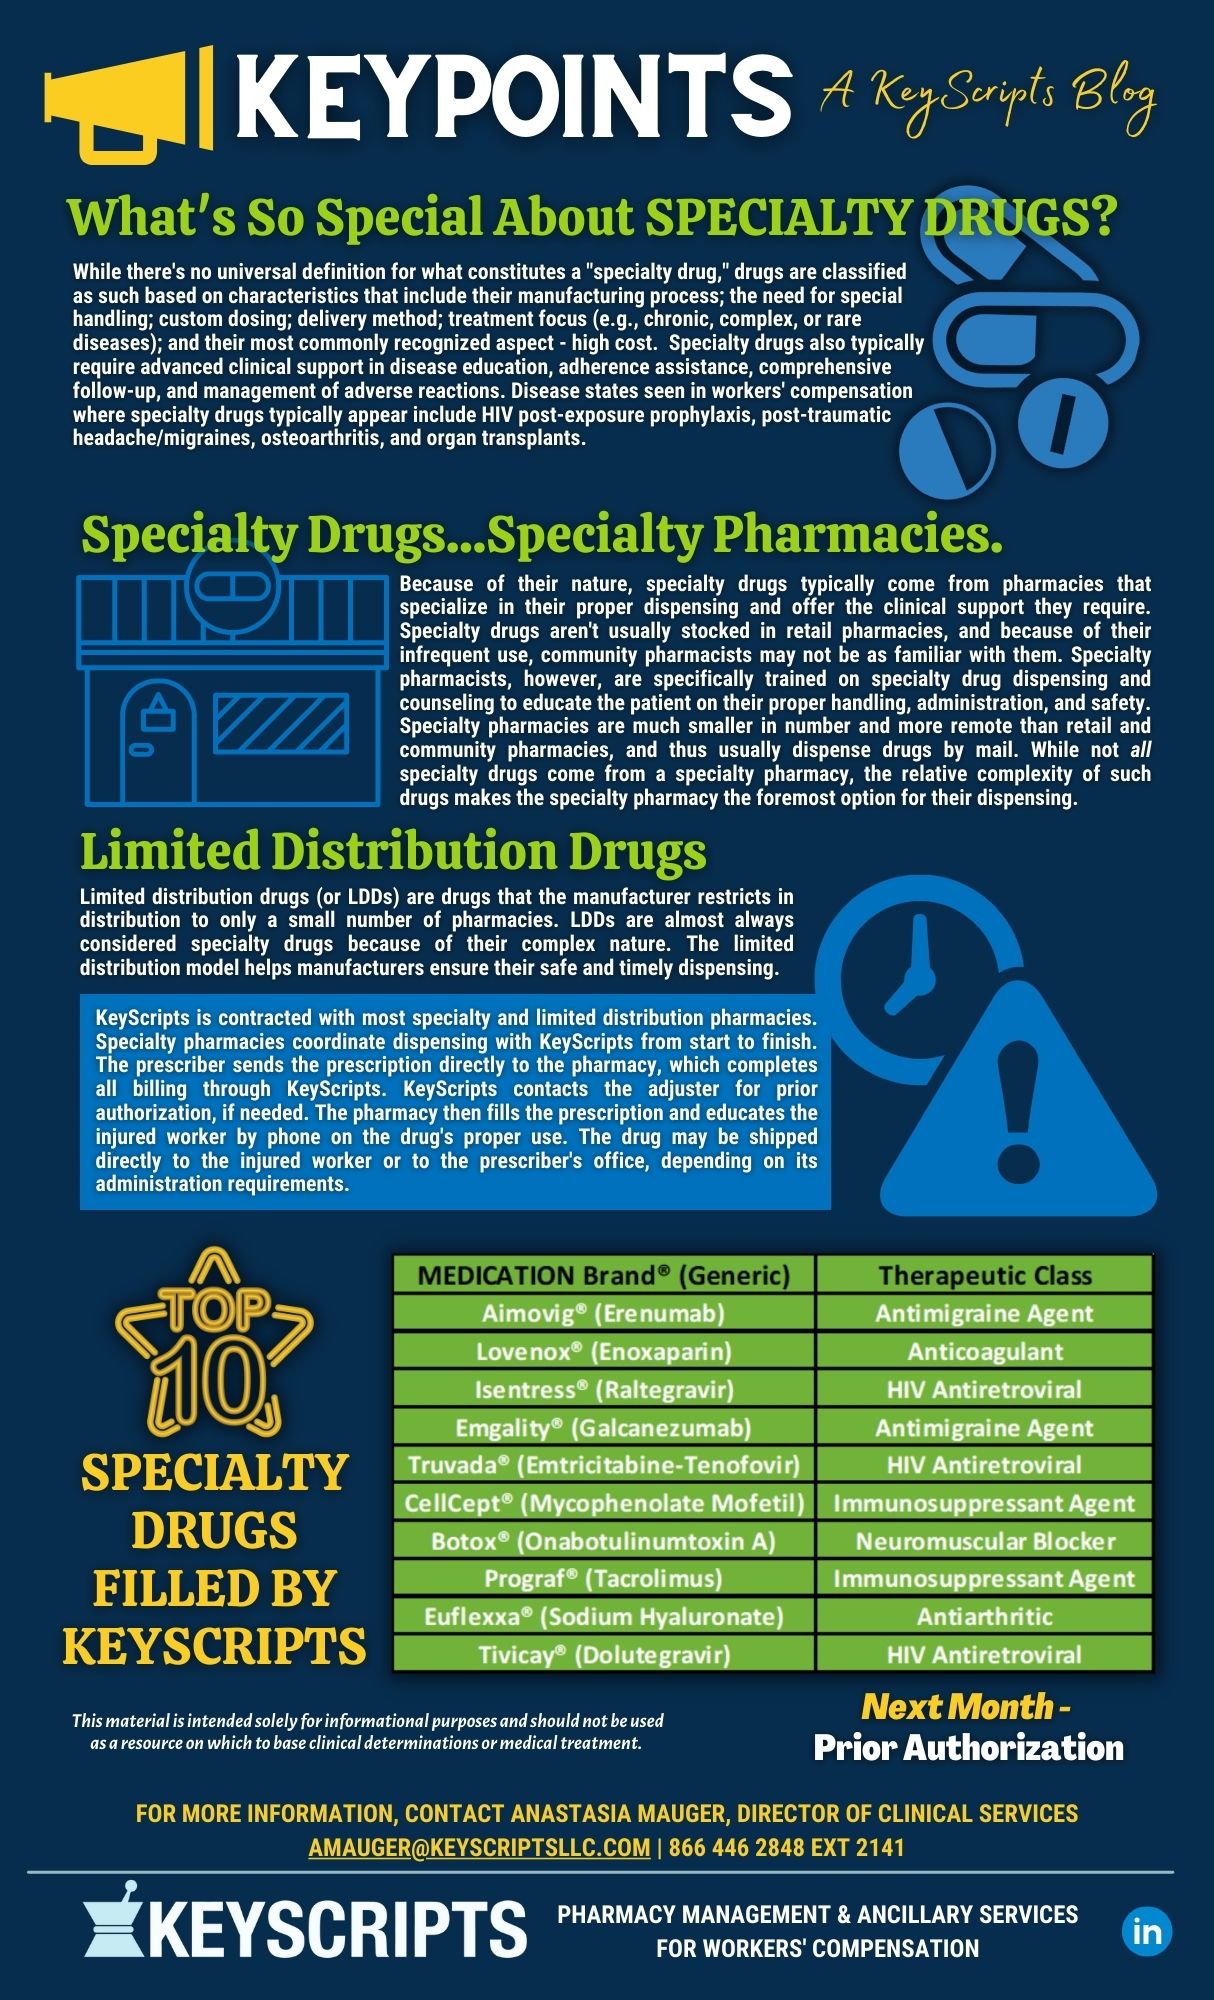 Specialty Drugs